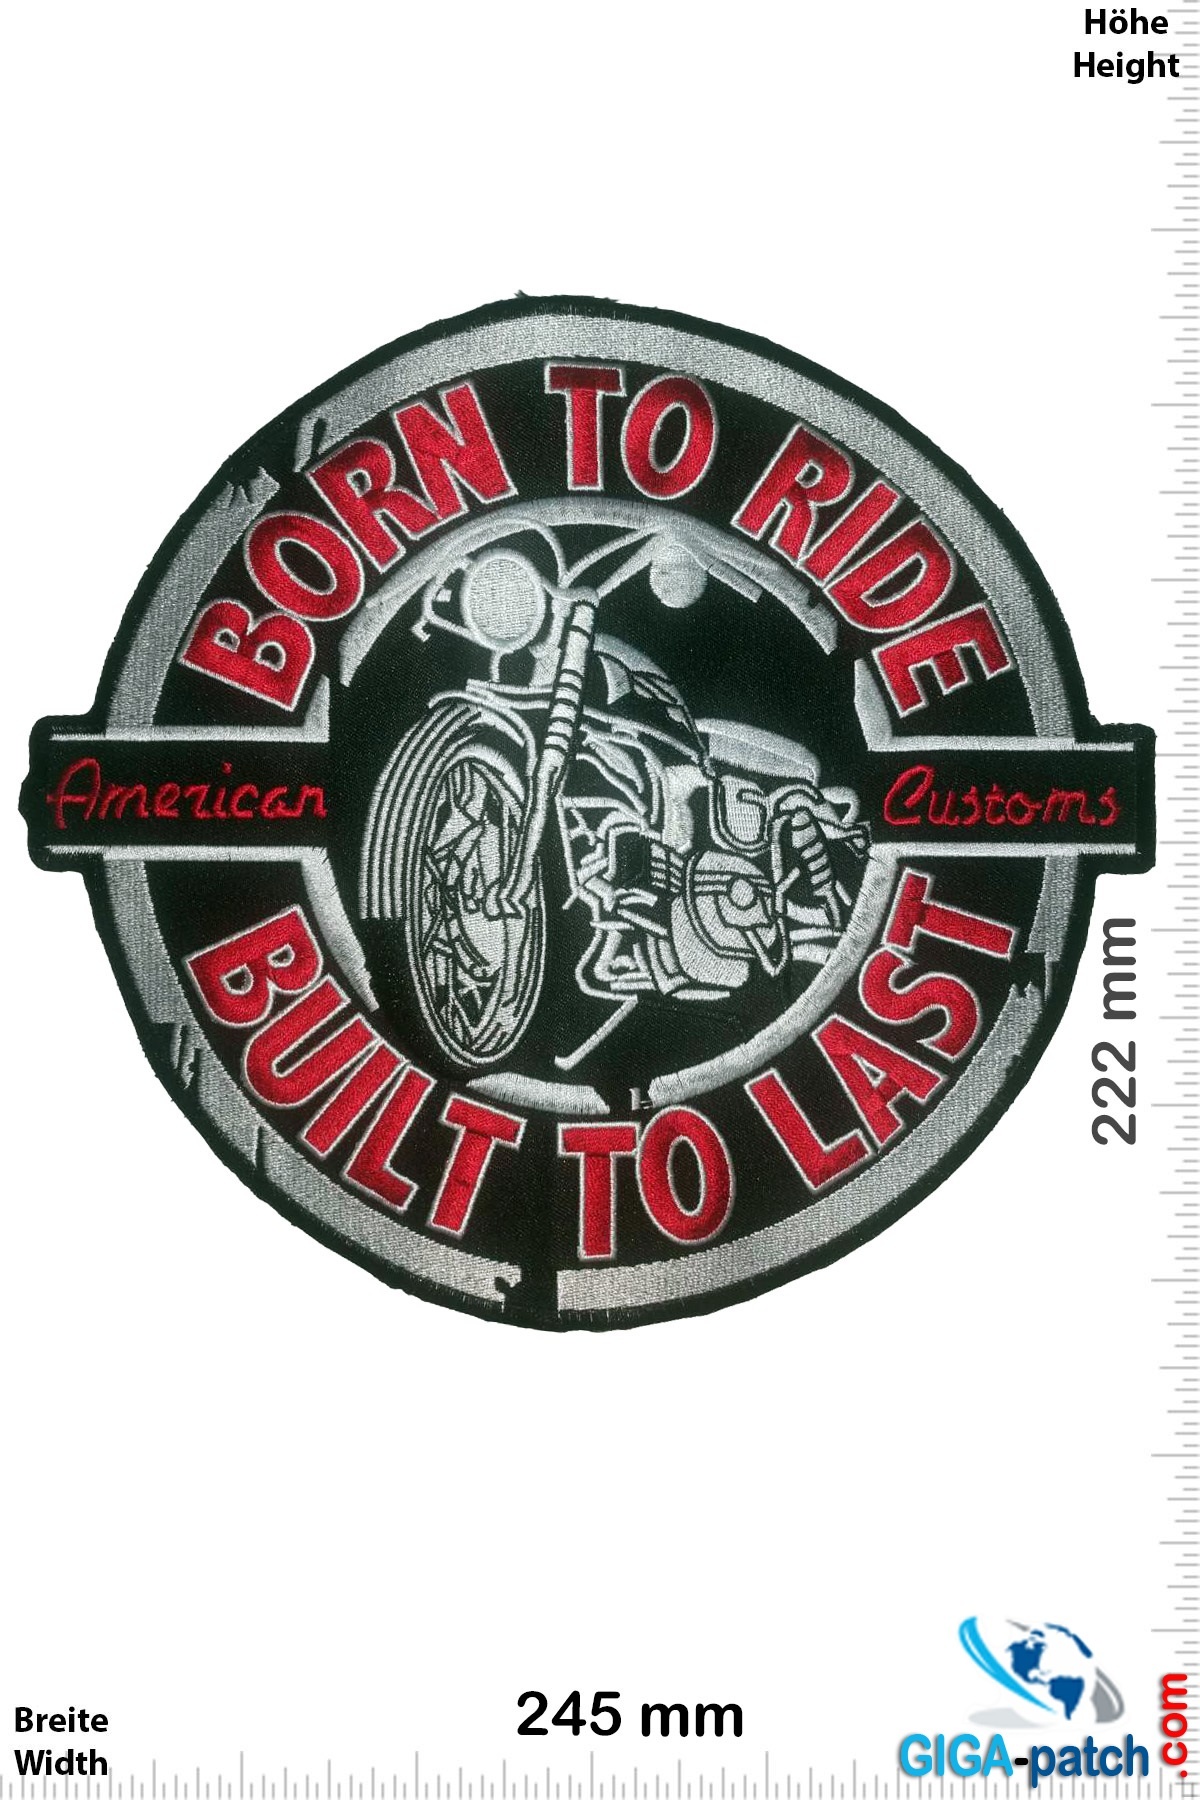 Born to ride custom culture, skull rider buy t shirt design for commercial  use - Buy t-shirt designs